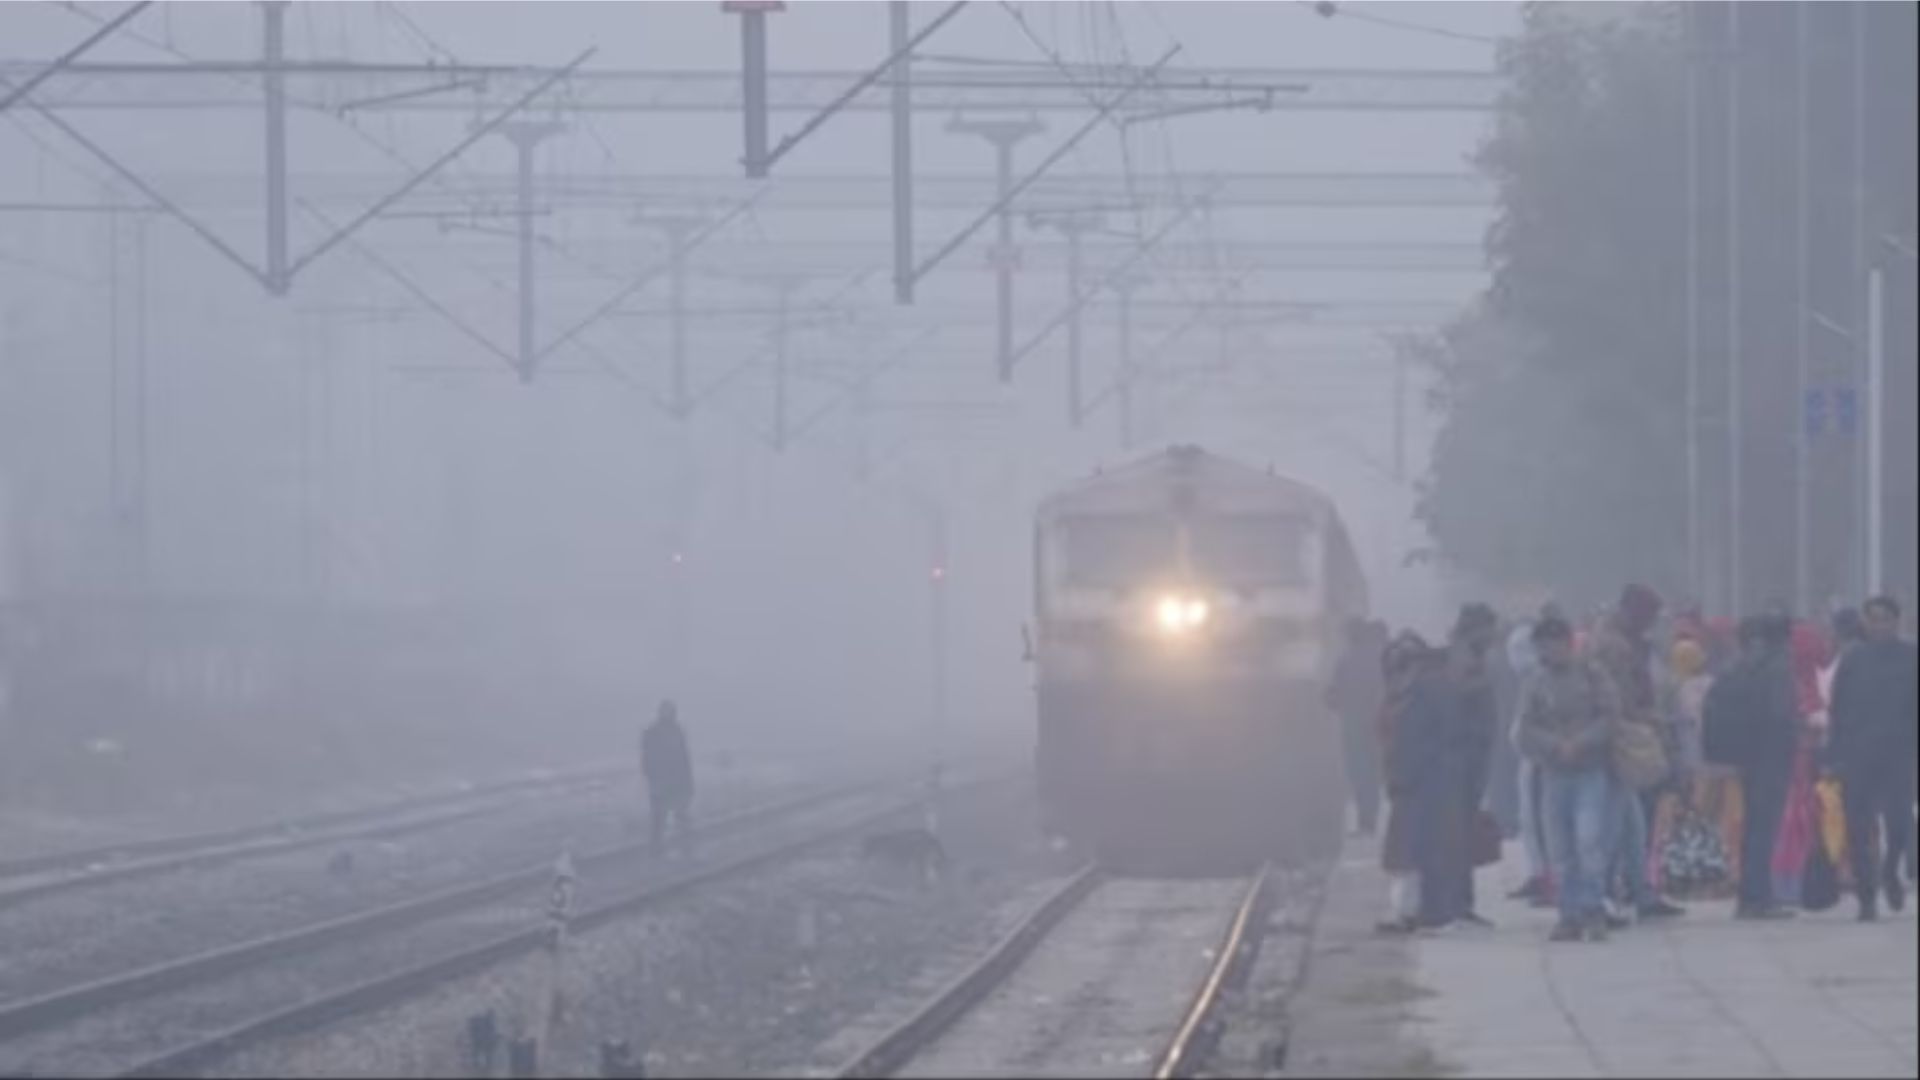 24 trains delayed due to dense fog and cold weather